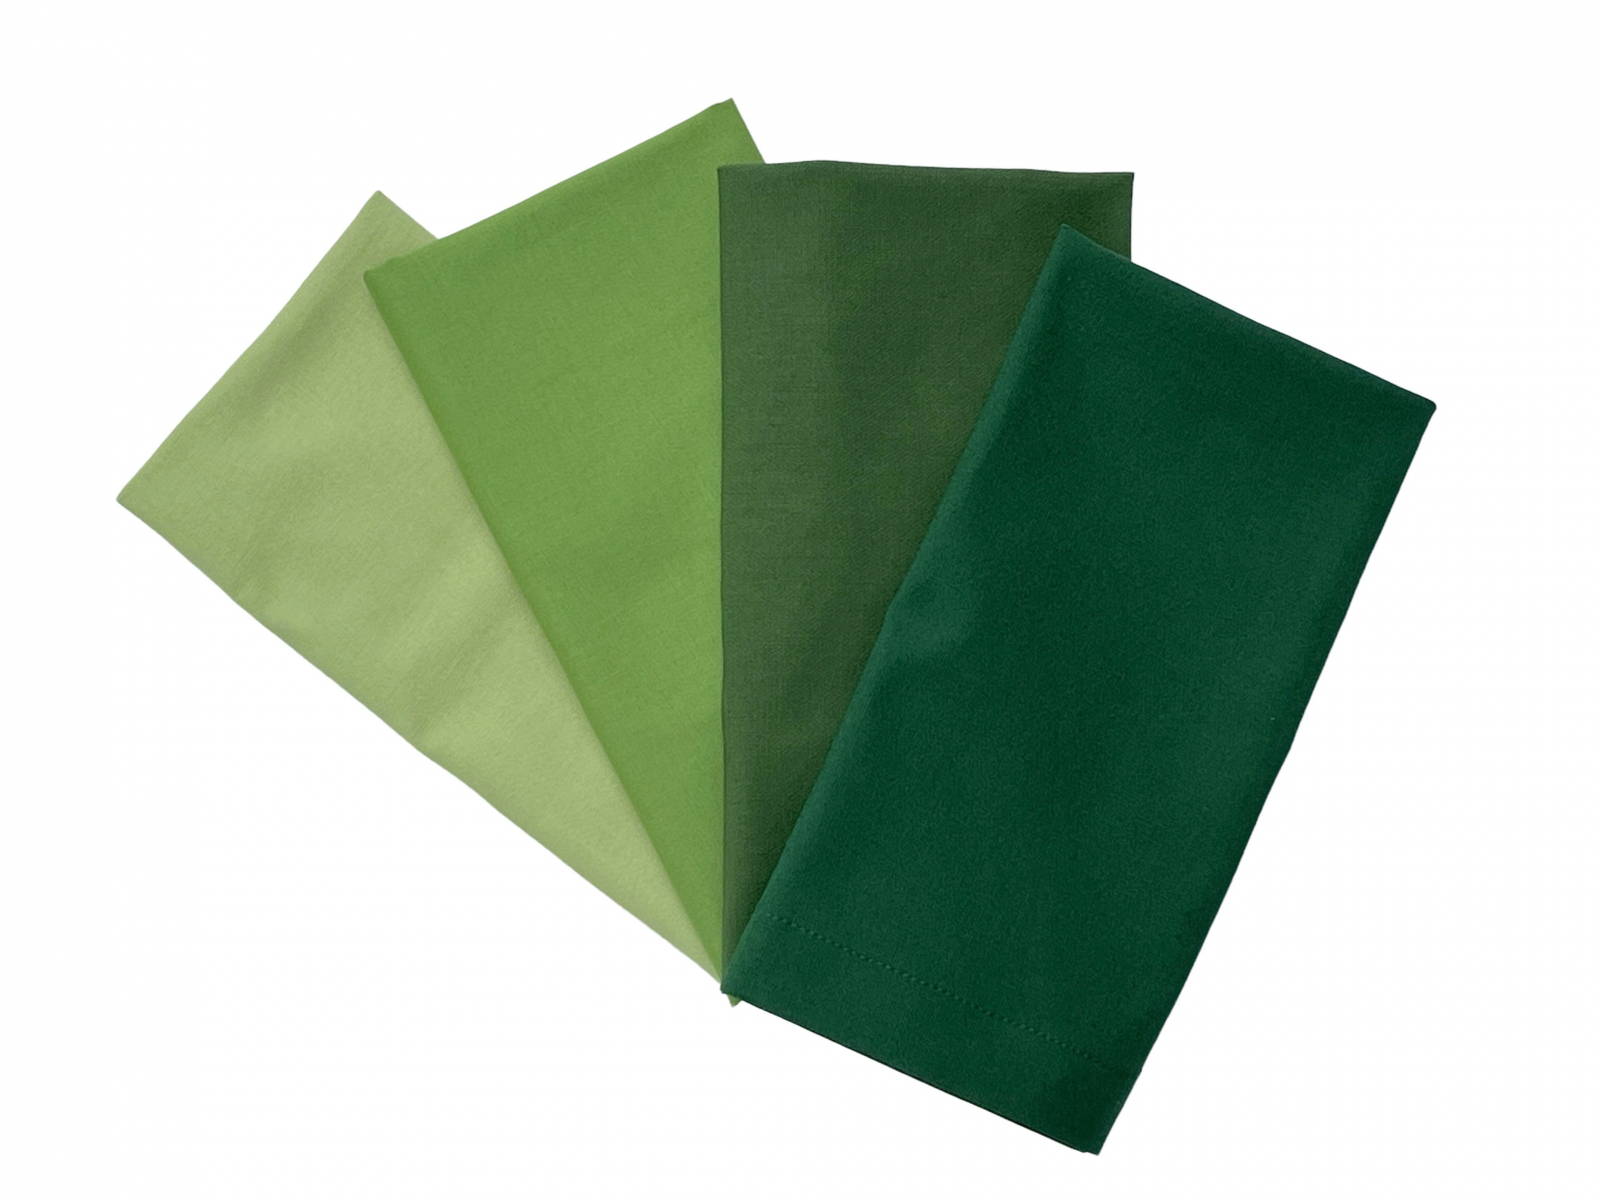 https://www.stitchedbybeverly.com/sites/stitchedbybeverly.indiemade.com/files/imagecache/im_clientsite_product_zoom/solid_green_cloth_napkins_set_of_4_or_6_r.jpg